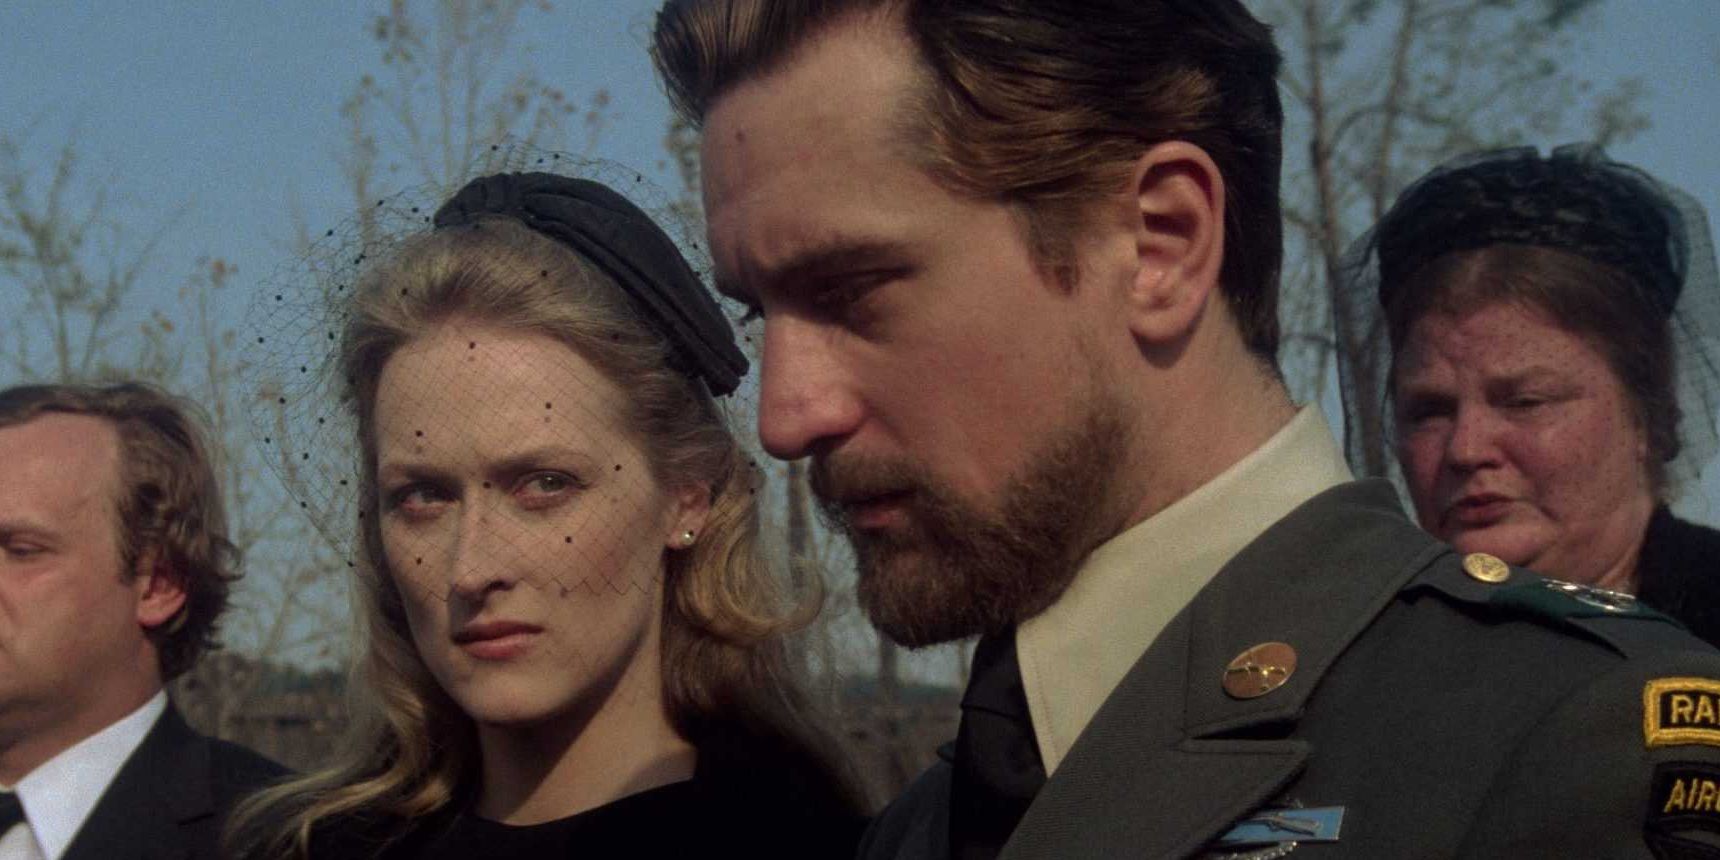 Mike and Linda at a funeral in The Deer Hunter